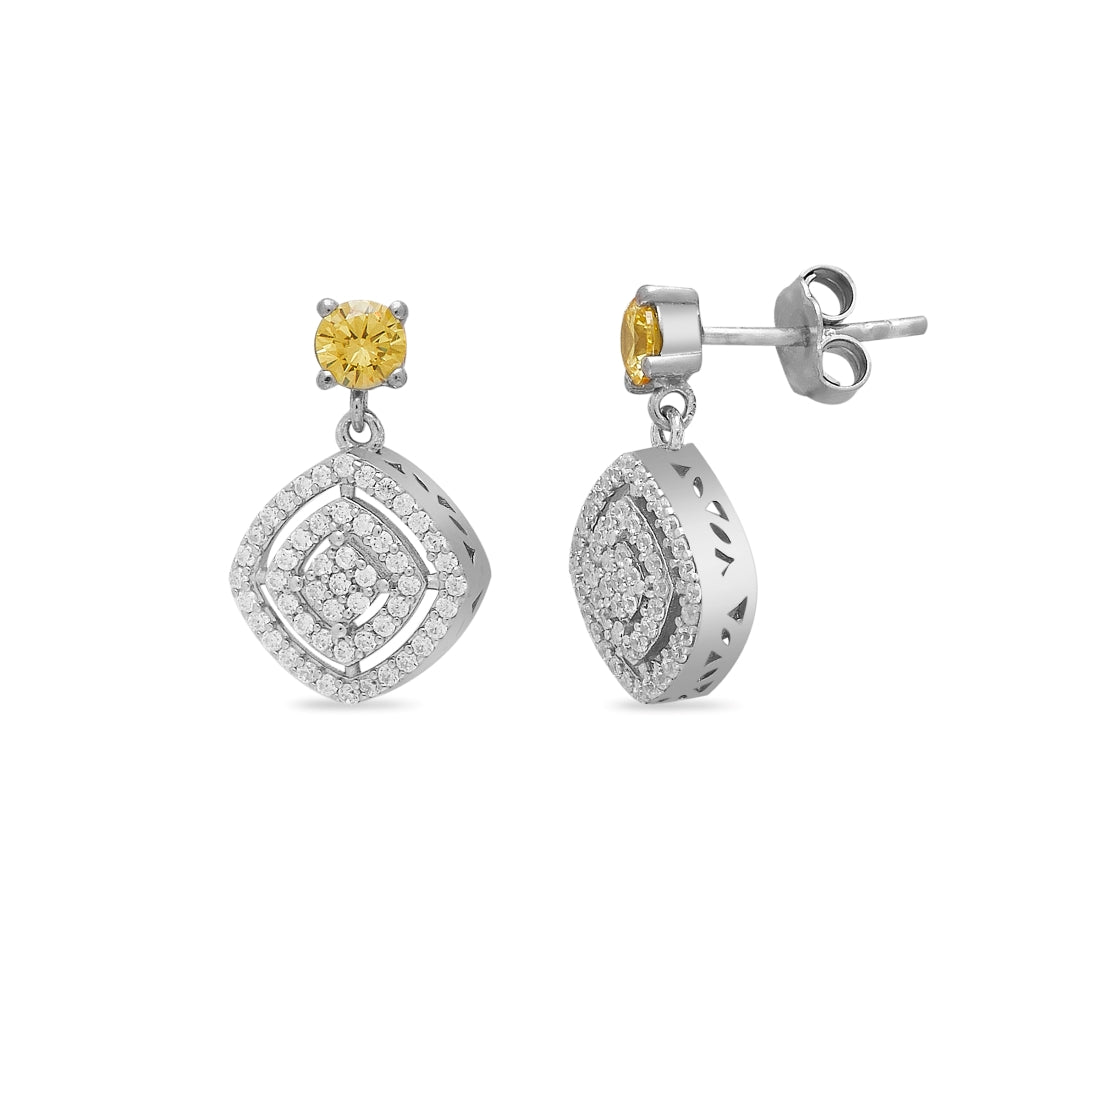 Timeless Elegance 925 Sterling Silver Rhodium-Plated Square Jewellery Set